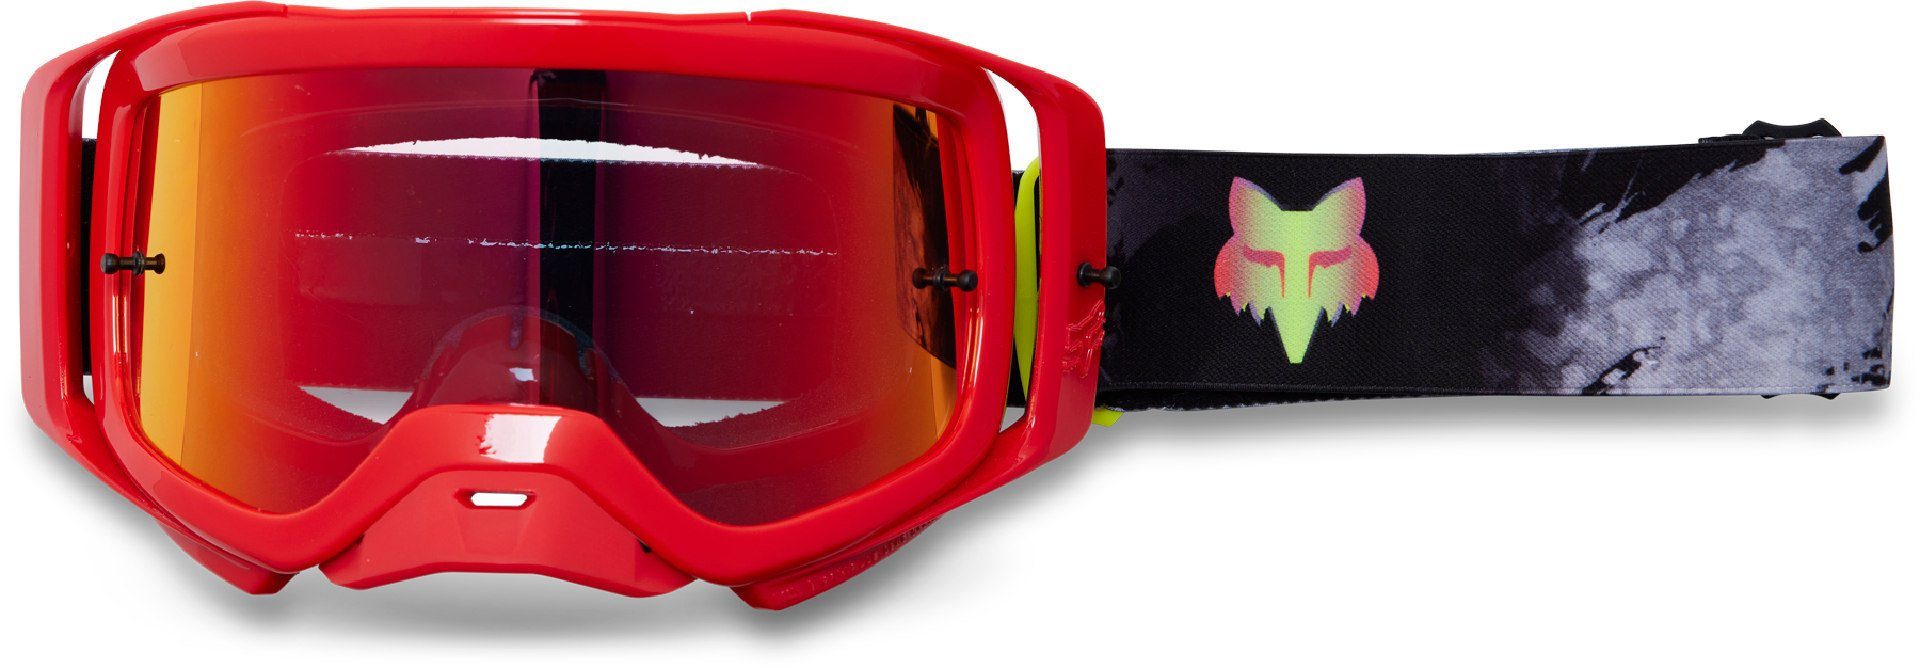 Dkay Brille Mirrored Motocross Sonnenbrille Fox Airspace